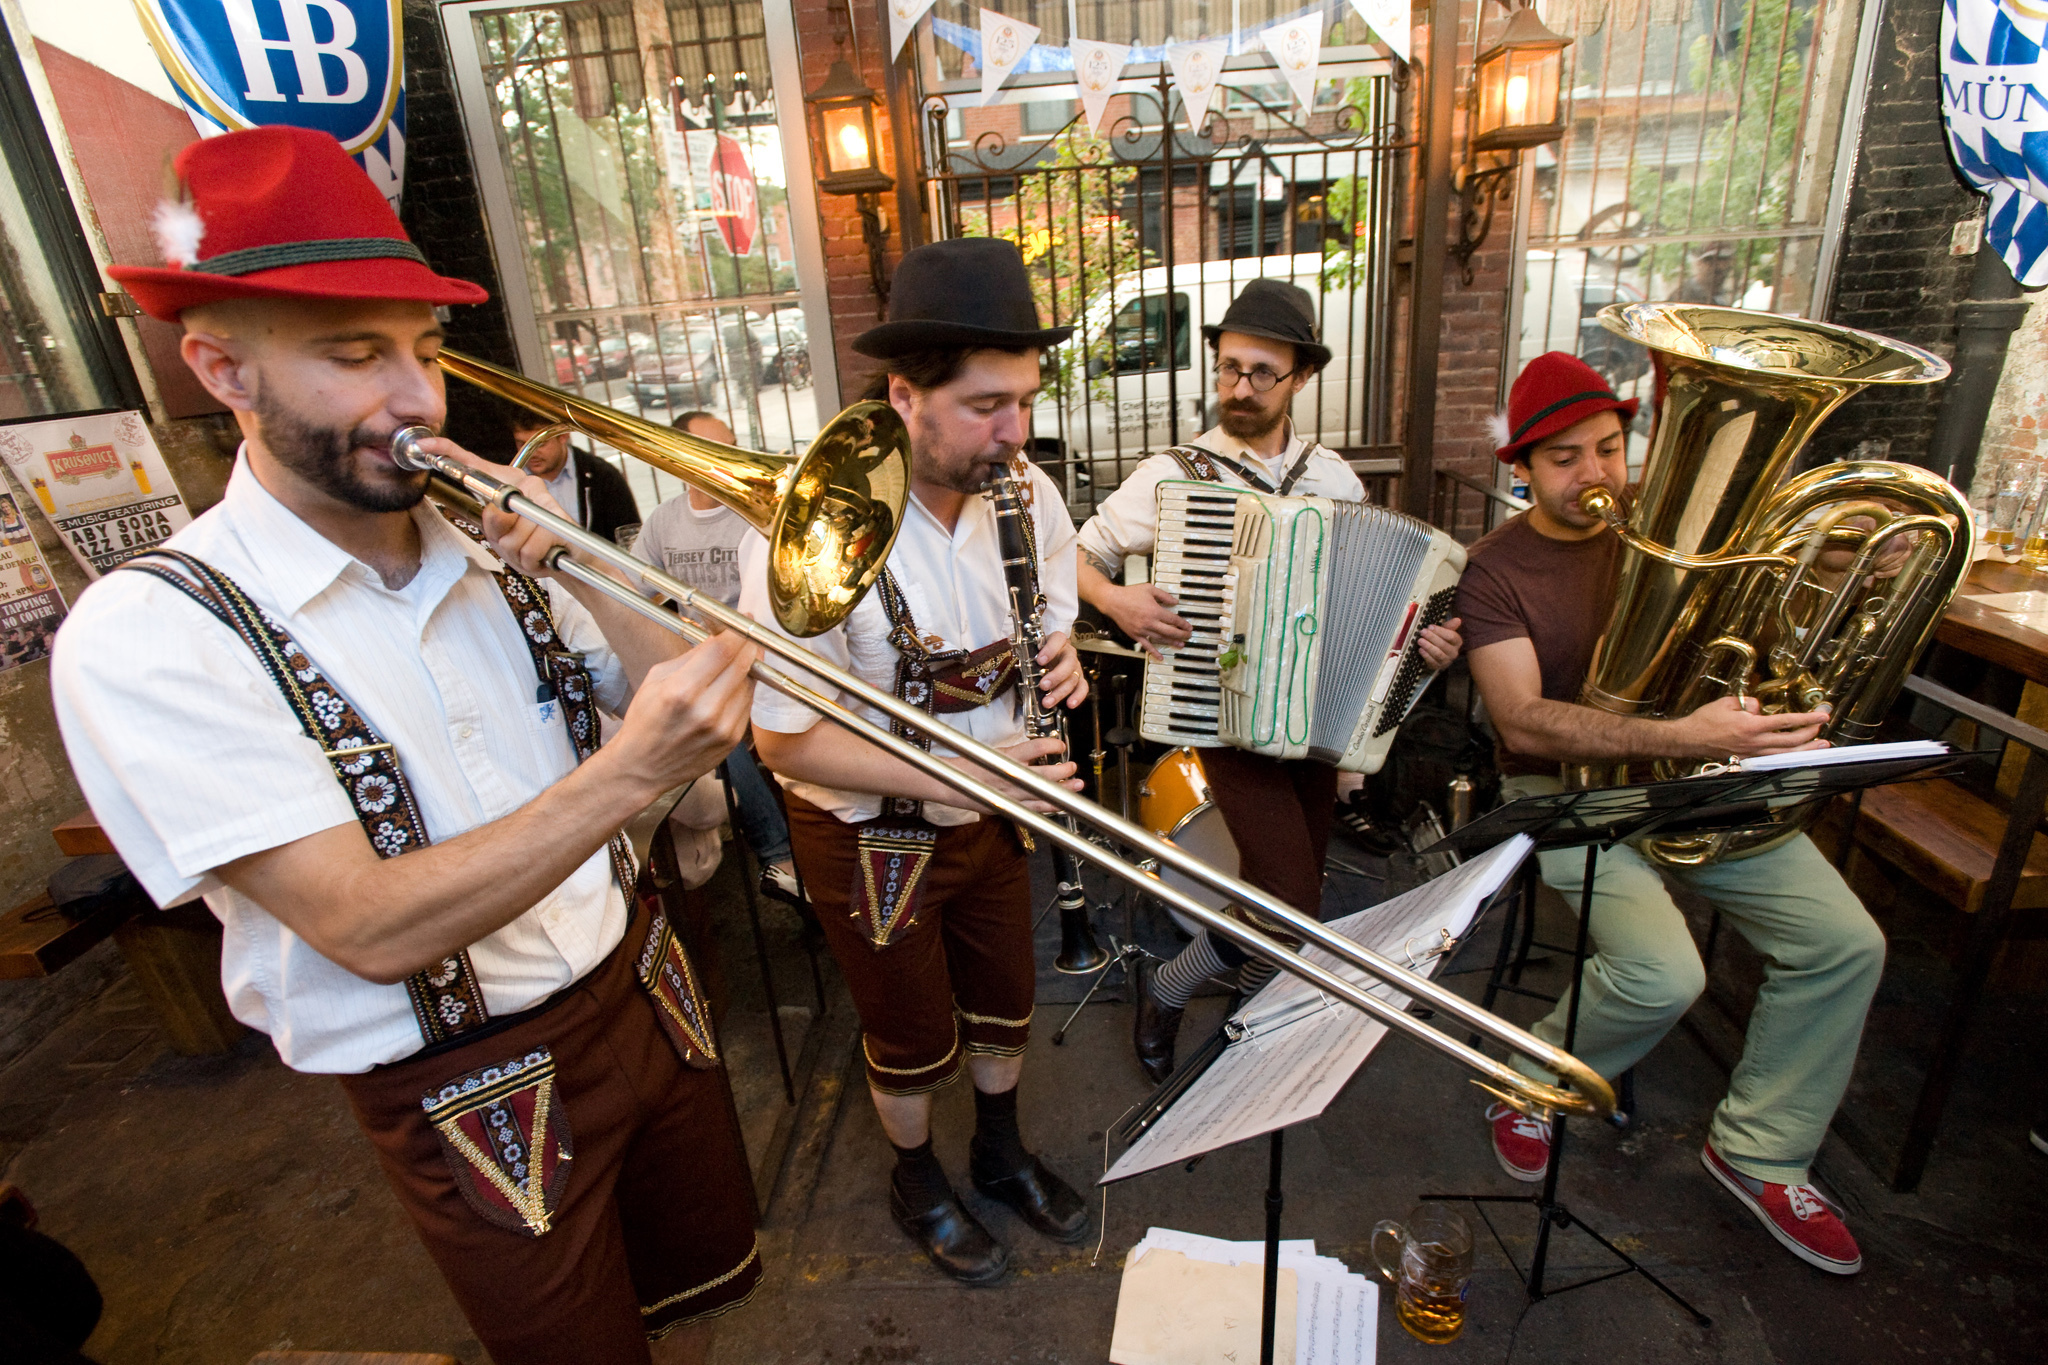 Oktoberfest NYC 2019 Guide to Beer and Celebrations